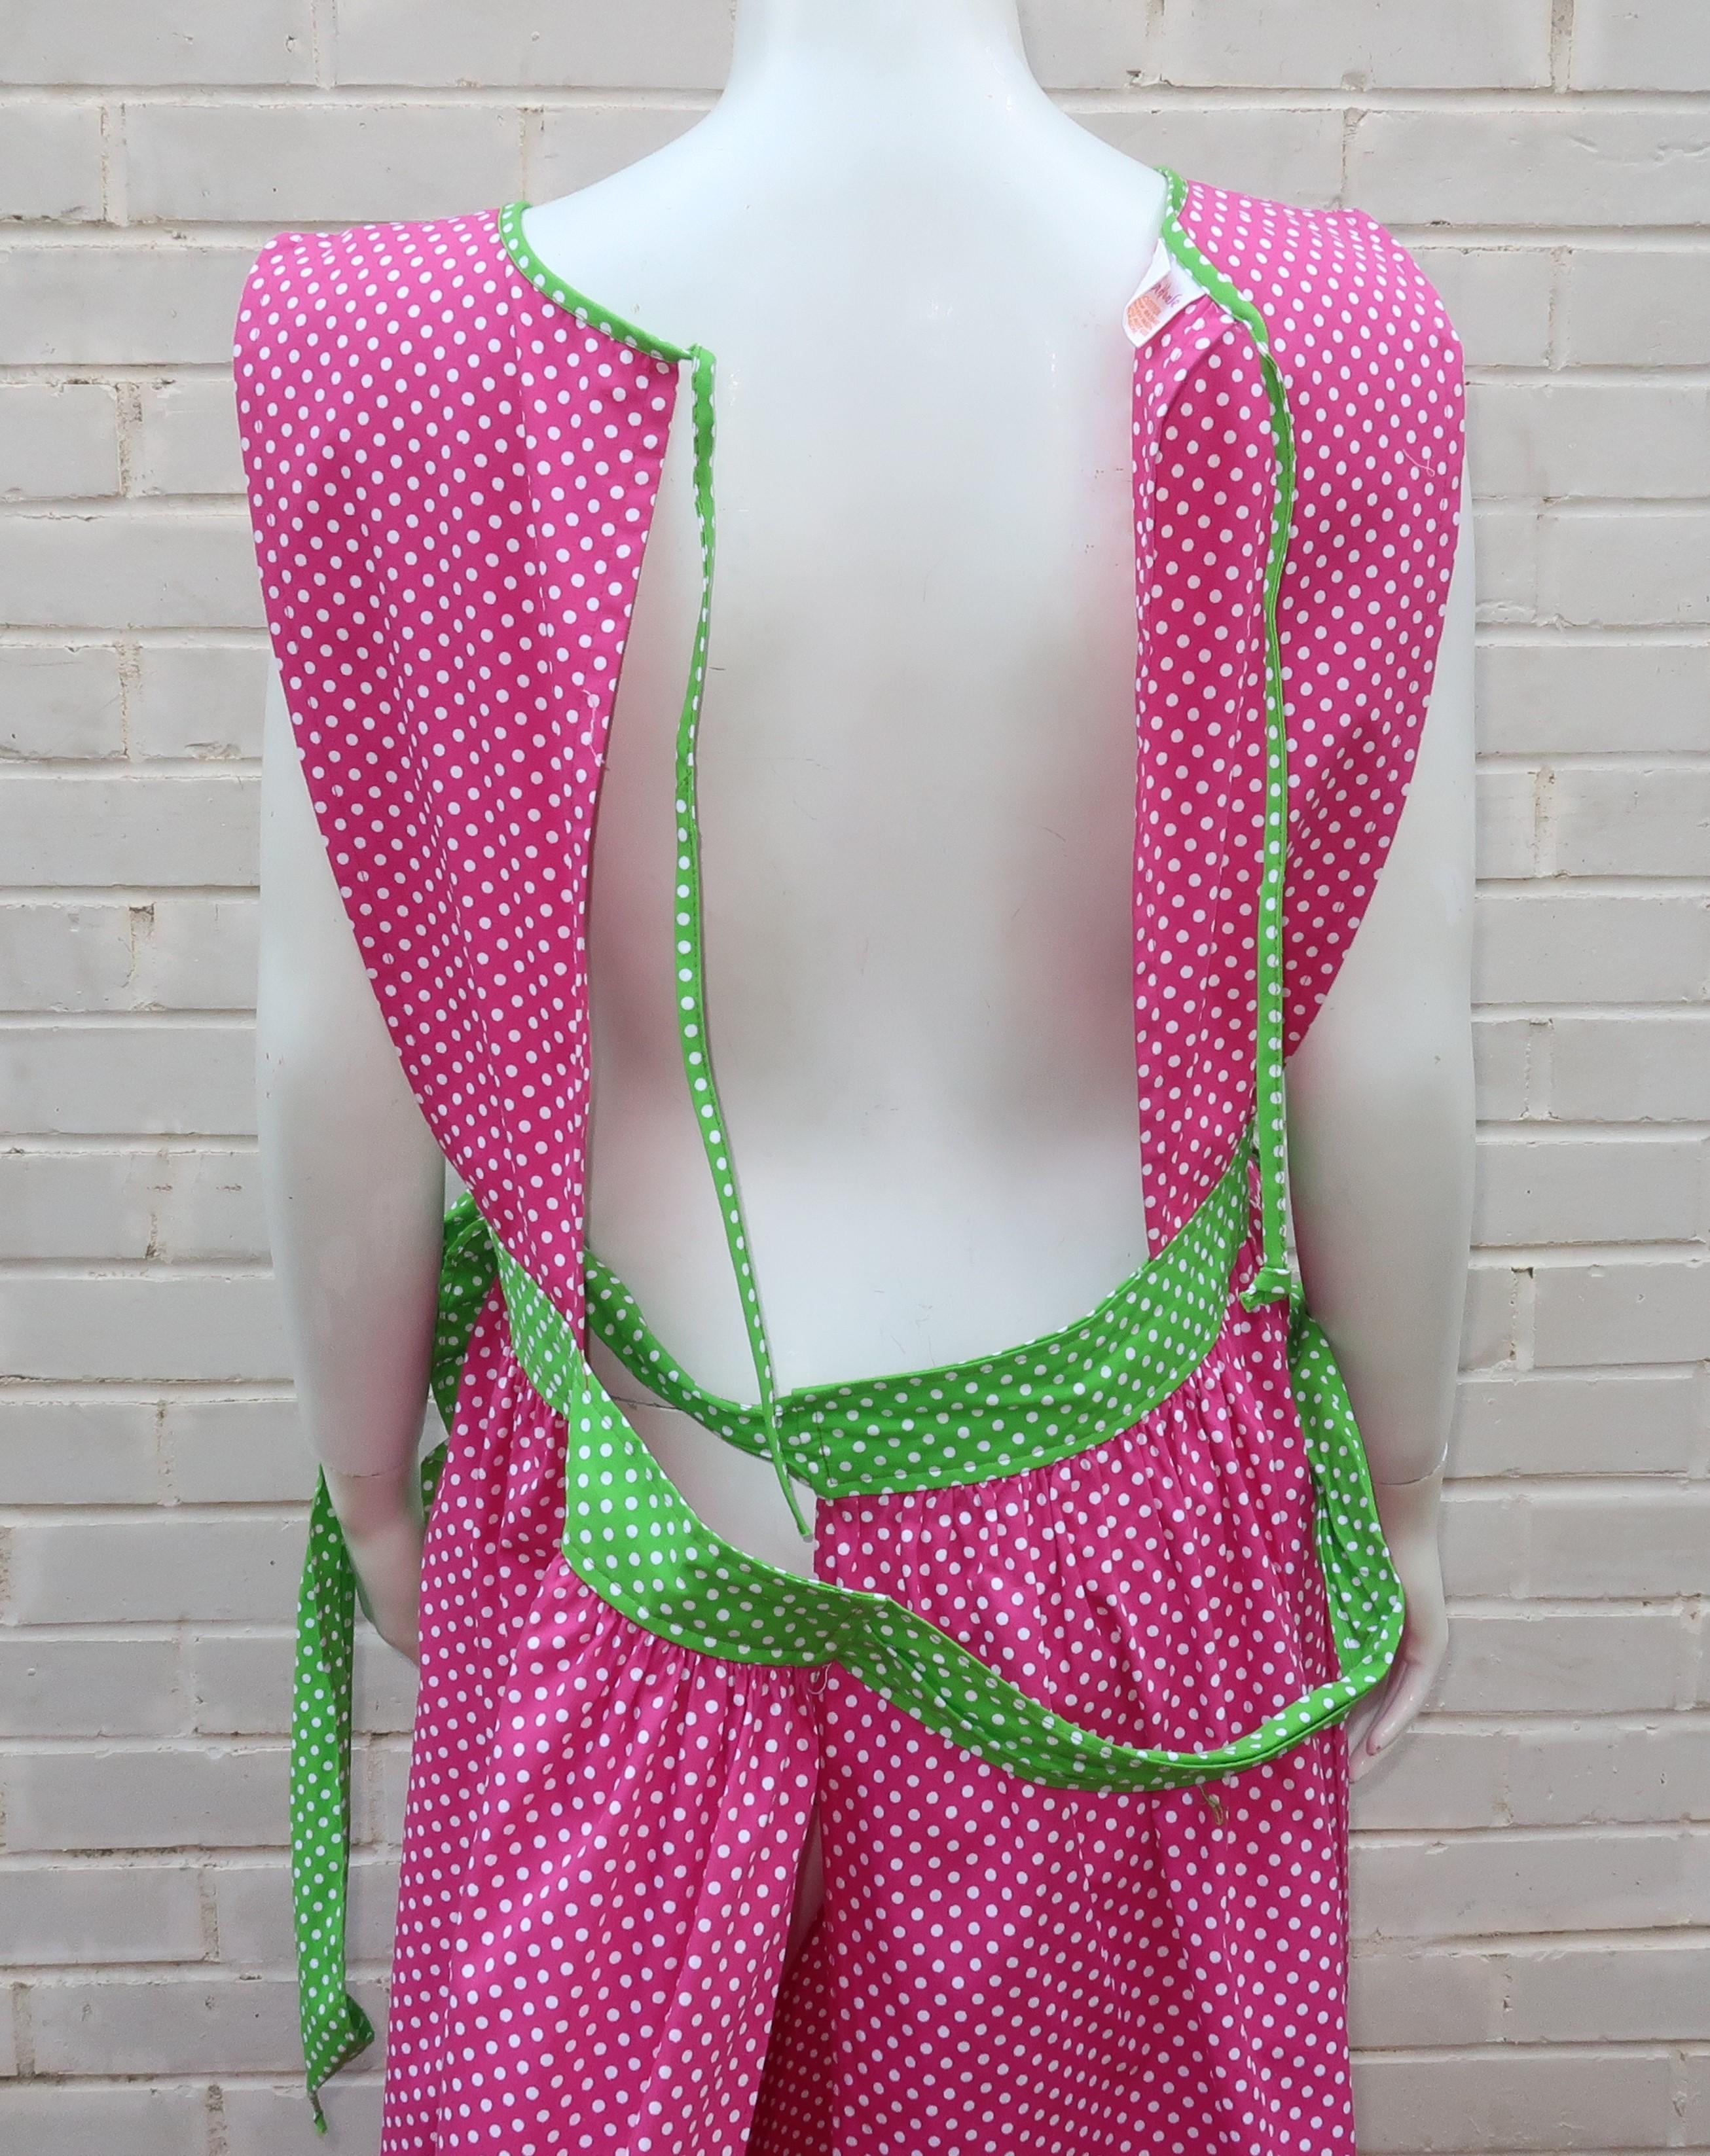 Design House Pink & Green Cotton Pinafore Apron Dress, C.1970 For Sale 6